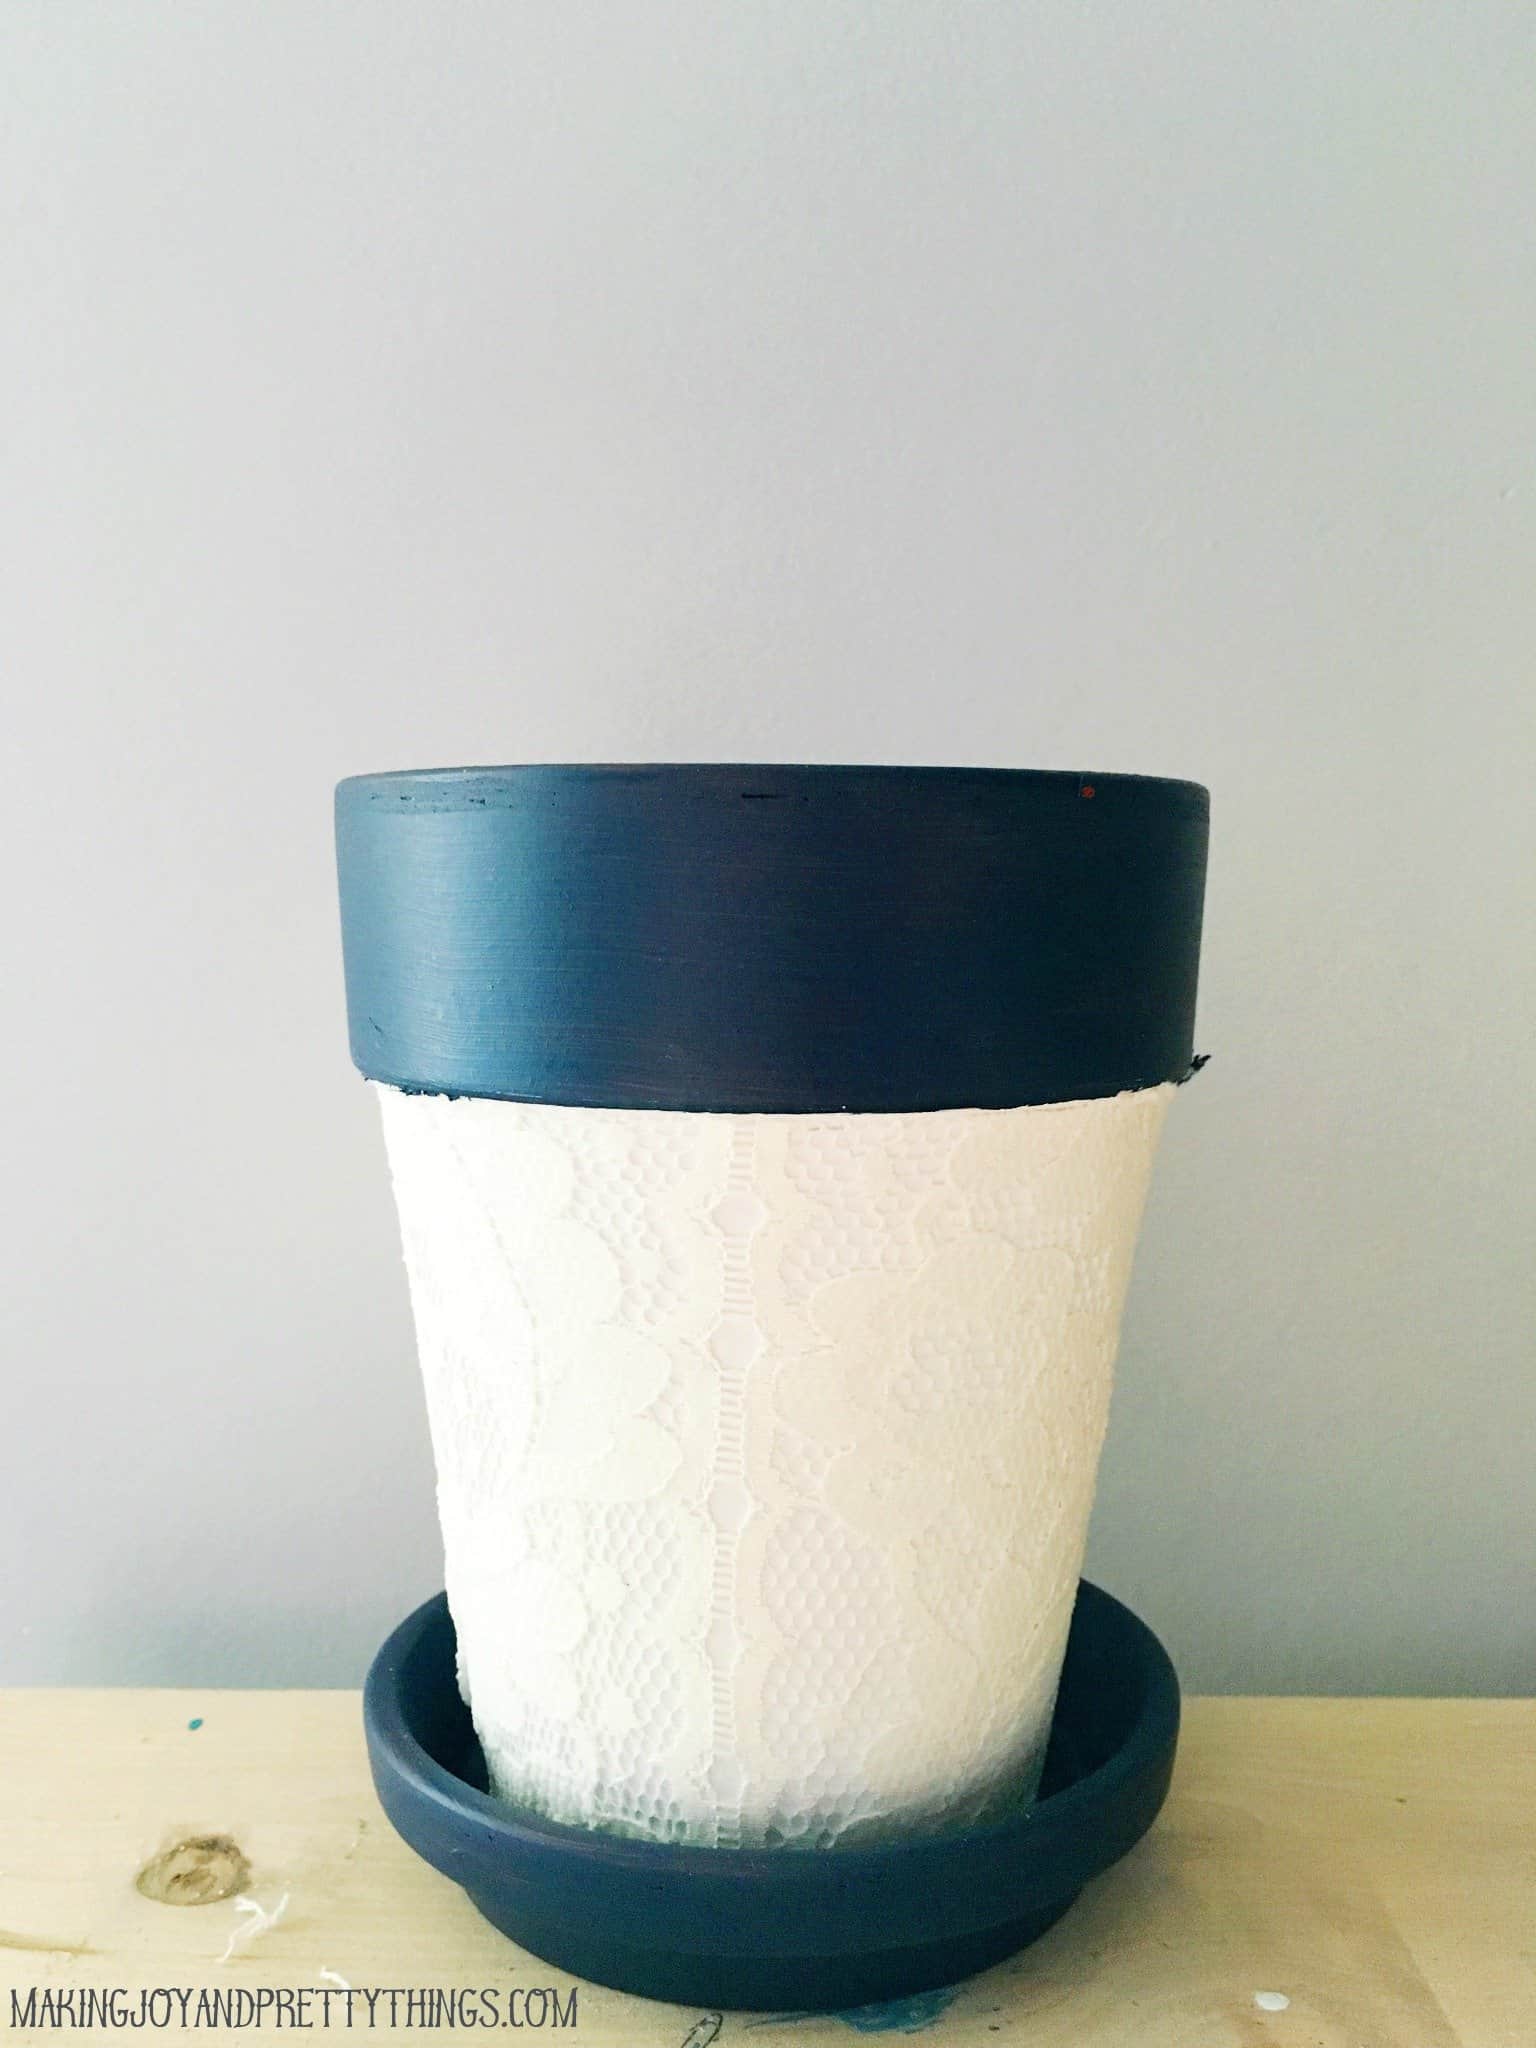 DIY Lace Covered Pot perfect to add to your farmhouse decor, would also make a great diy gift. Easy and inexpensive DIY.